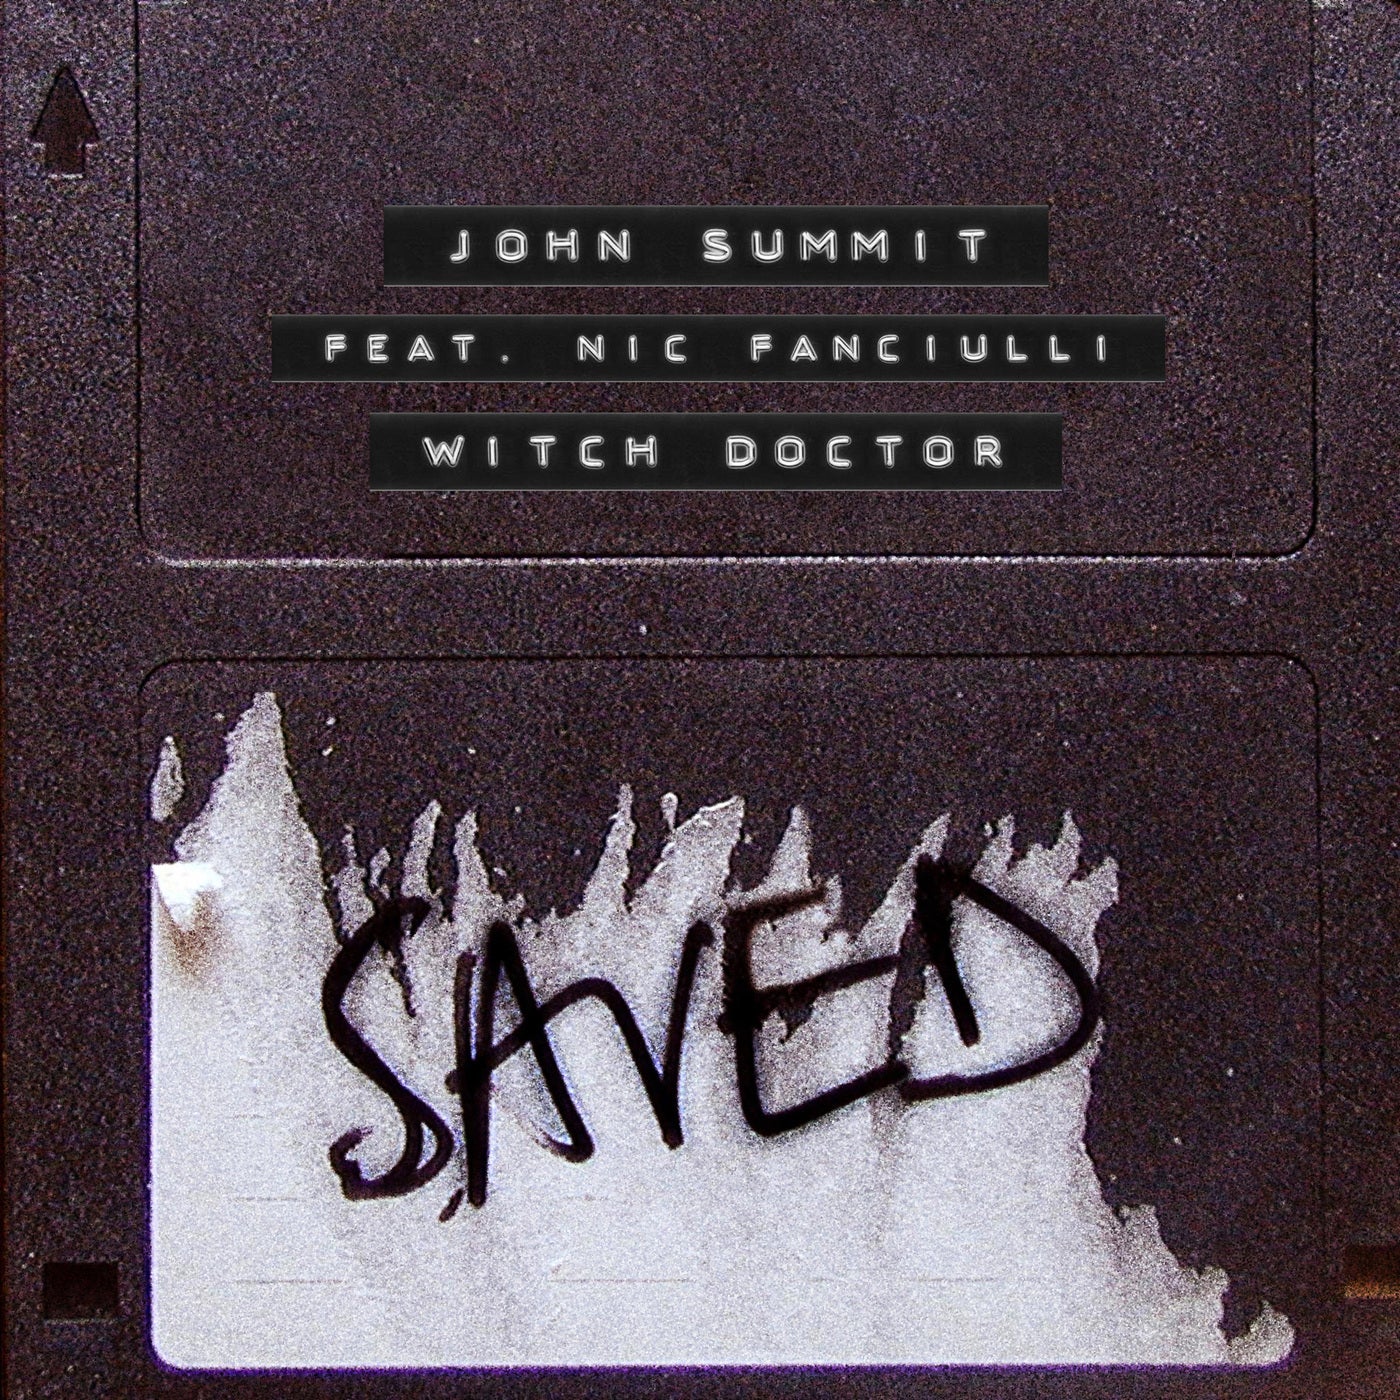 image cover: Nic Fanciulli, John Summit - Witch Doctor / SAVED24501Z